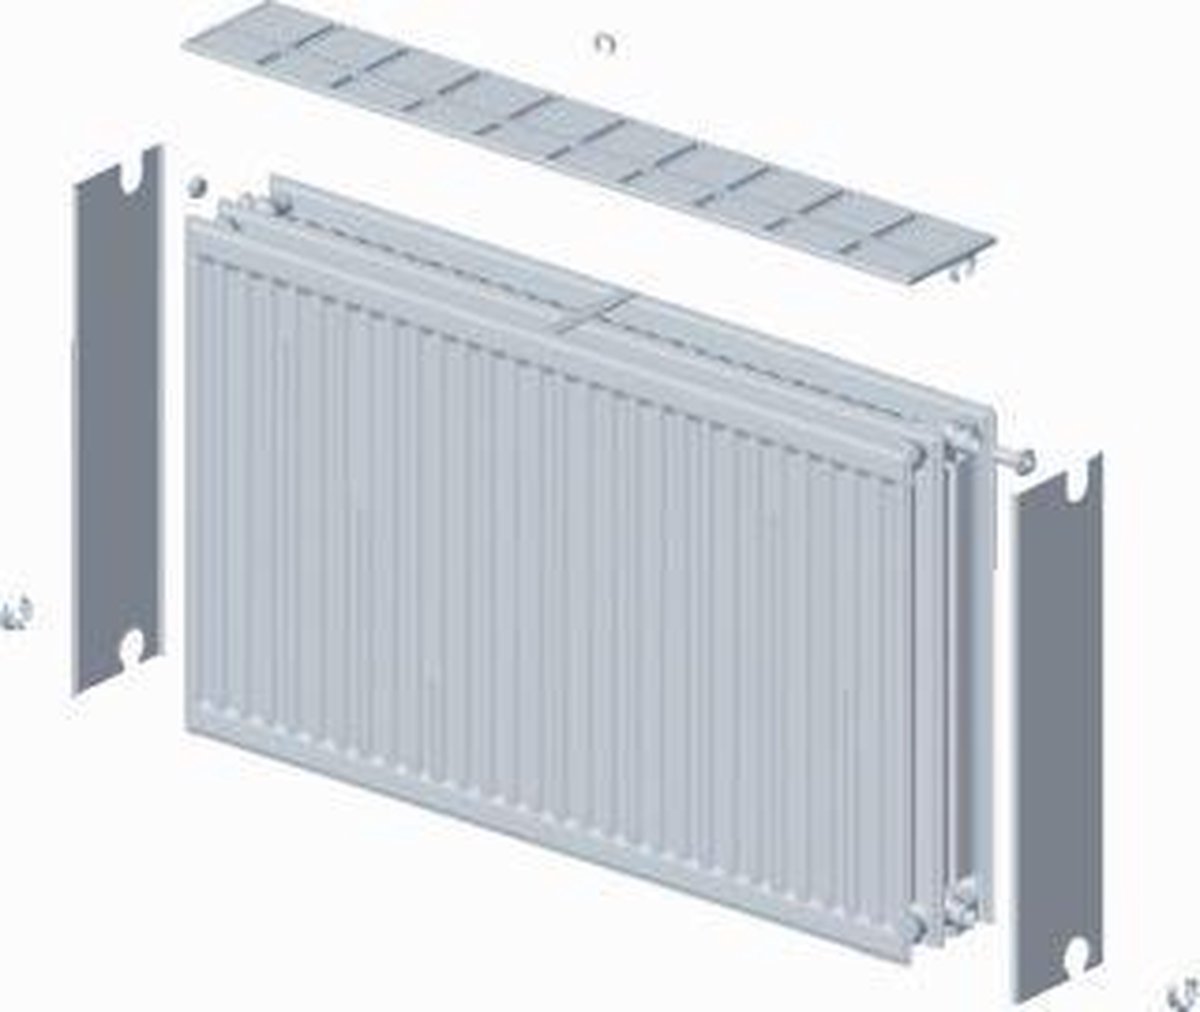 Stelrad paneelradiator Novello, staal, wit, (hxlxd) 500x800x158mm, 33